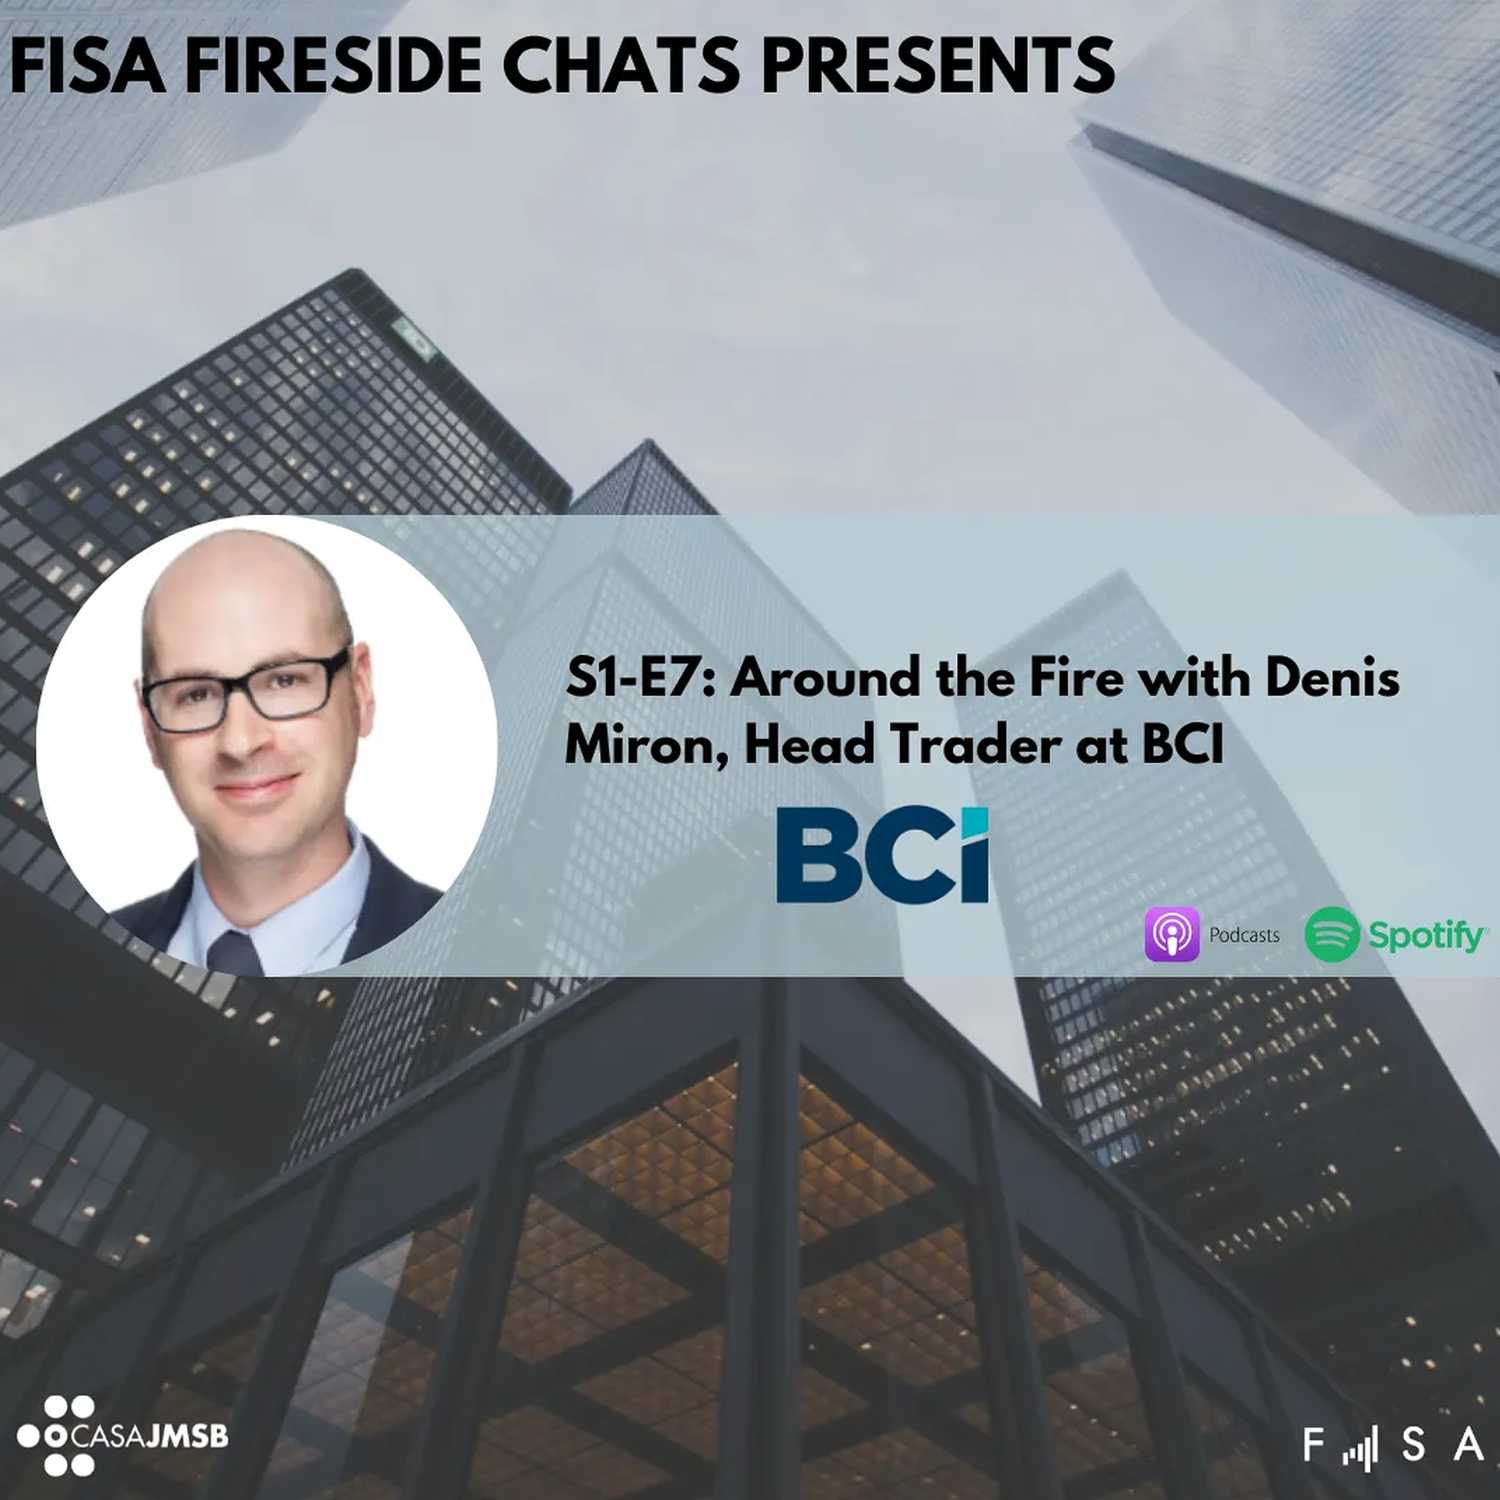 Around the Fire with Denis Miron, Head Trader at BCI